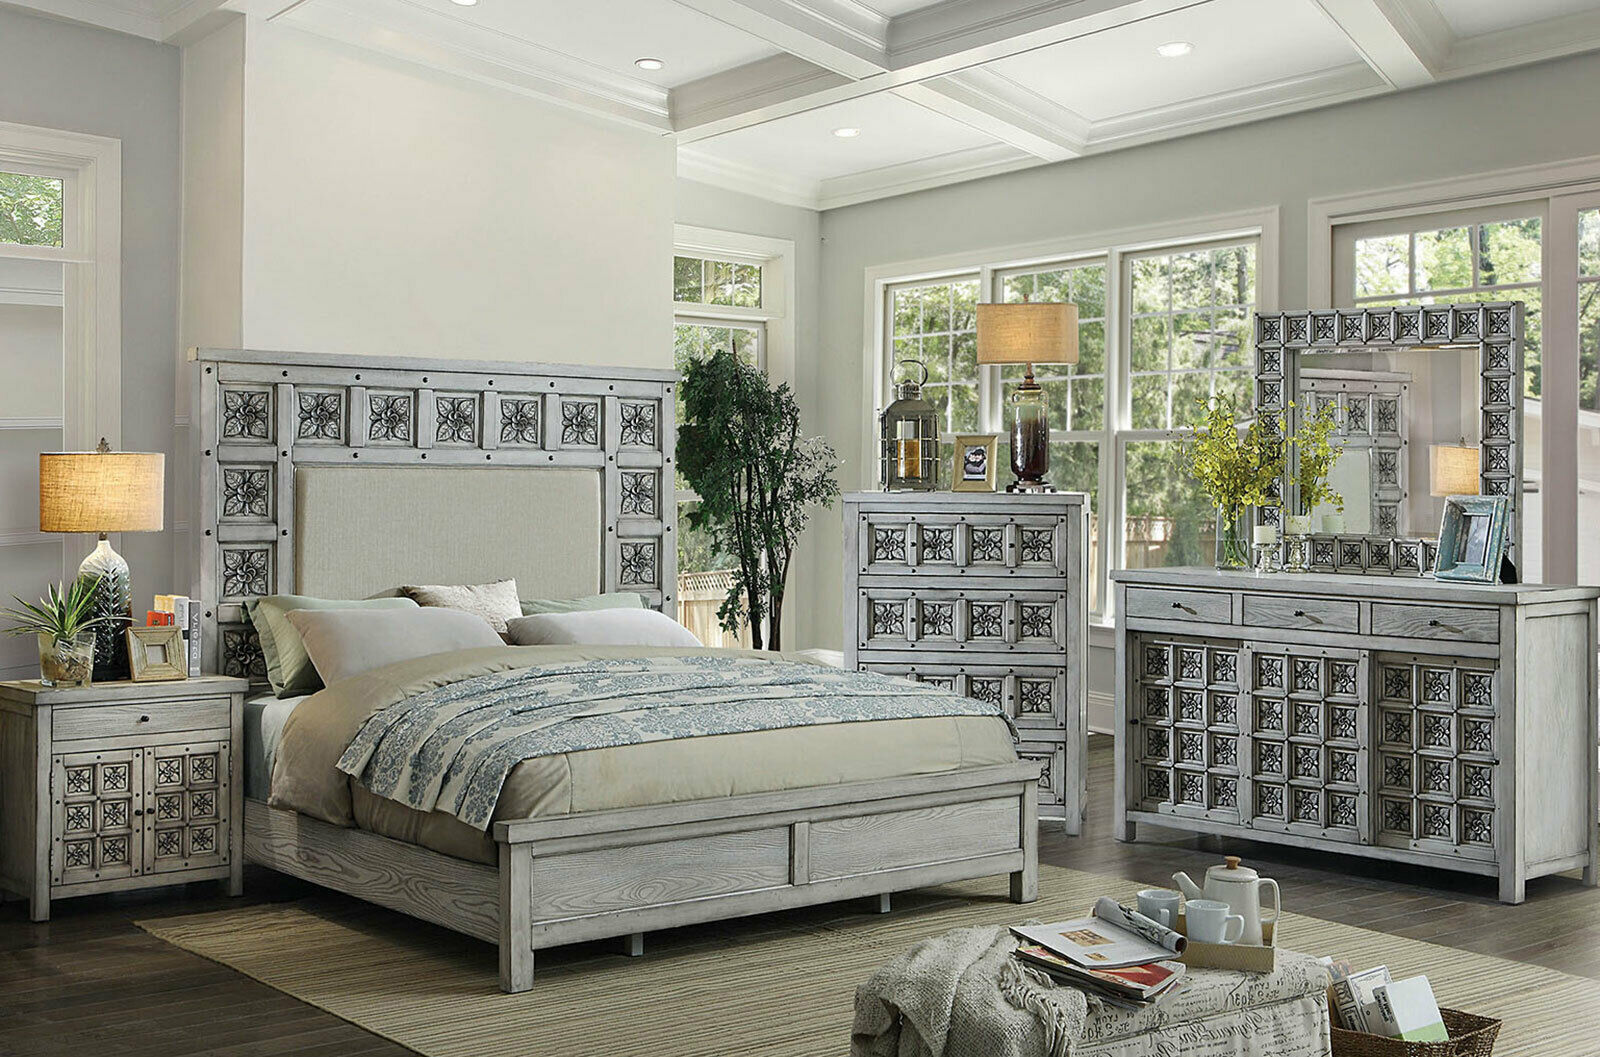 NEW Transitional Gray Wood Bedroom Suite Furniture ...